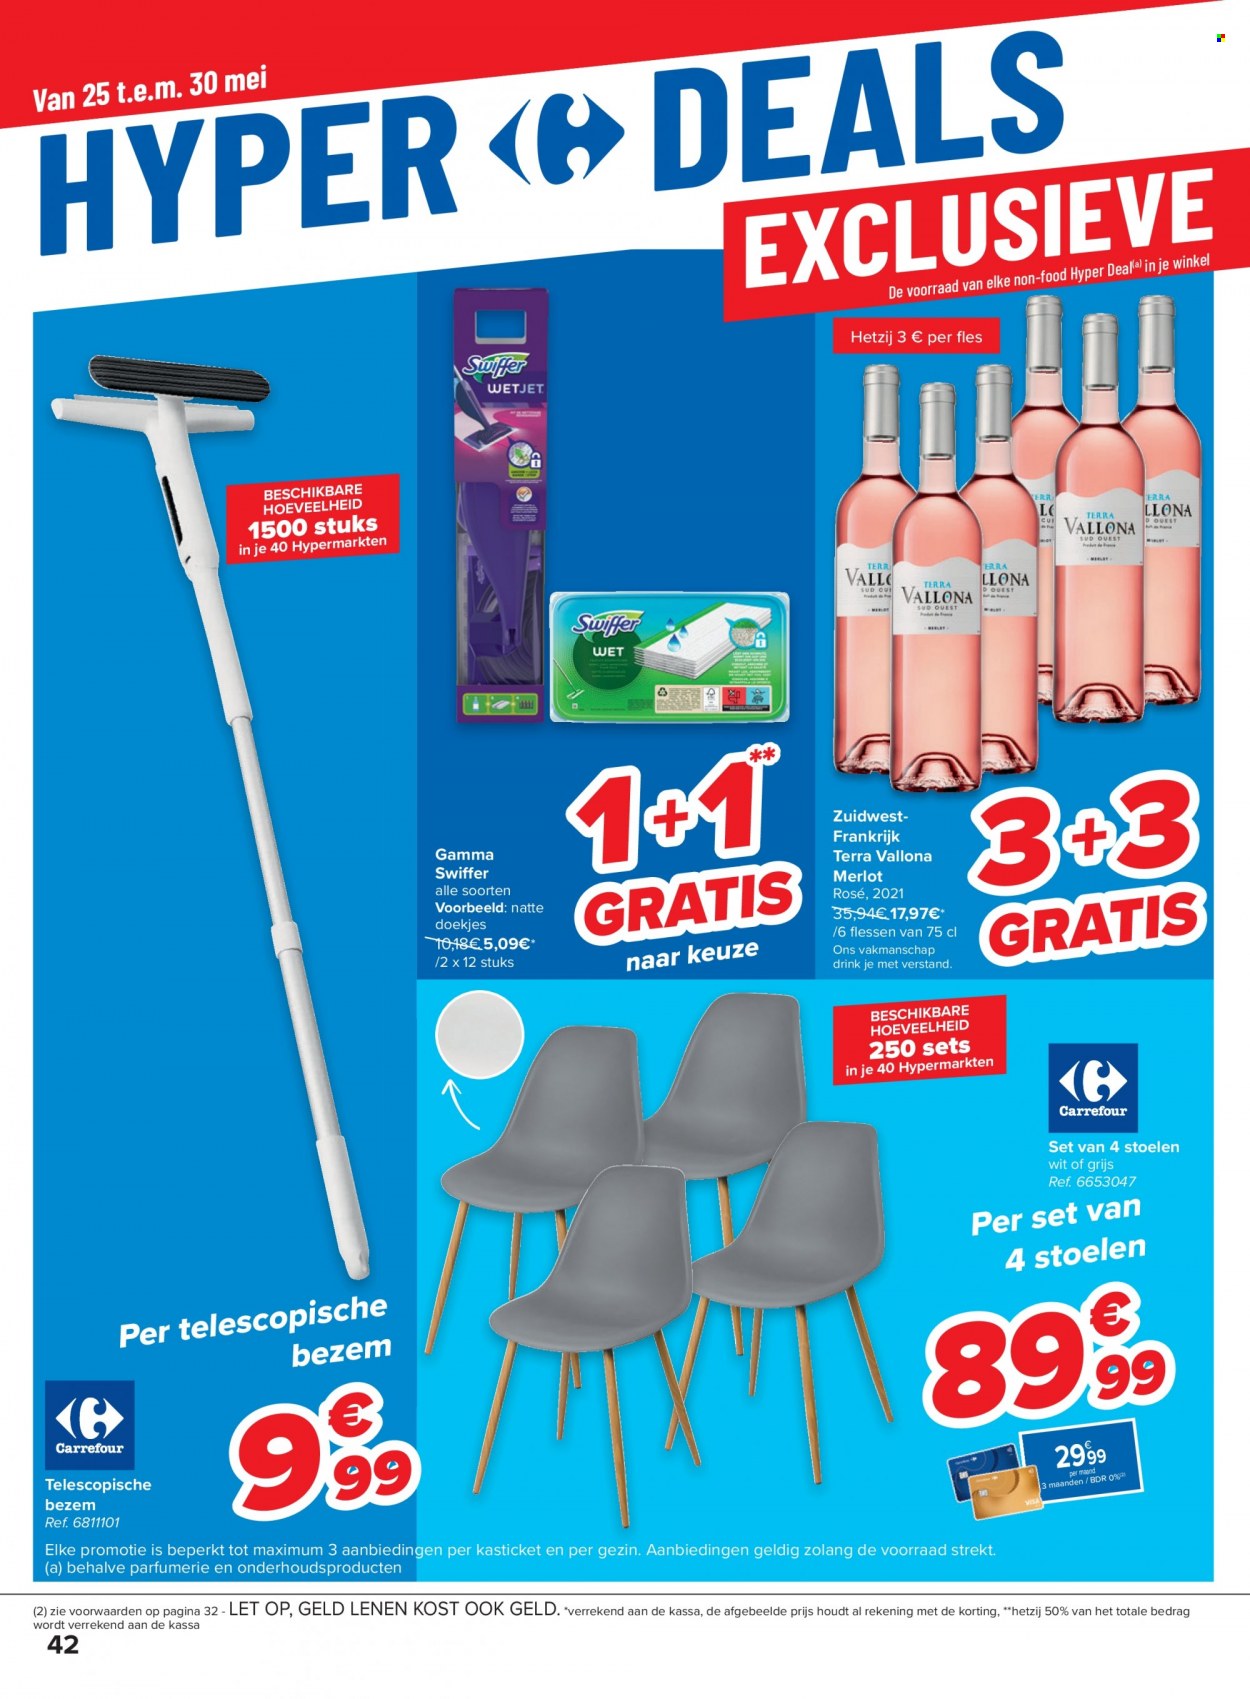 Catalogue Carrefour hypermarkt - 24.5.2022 - 30.5.2022. Page 42.